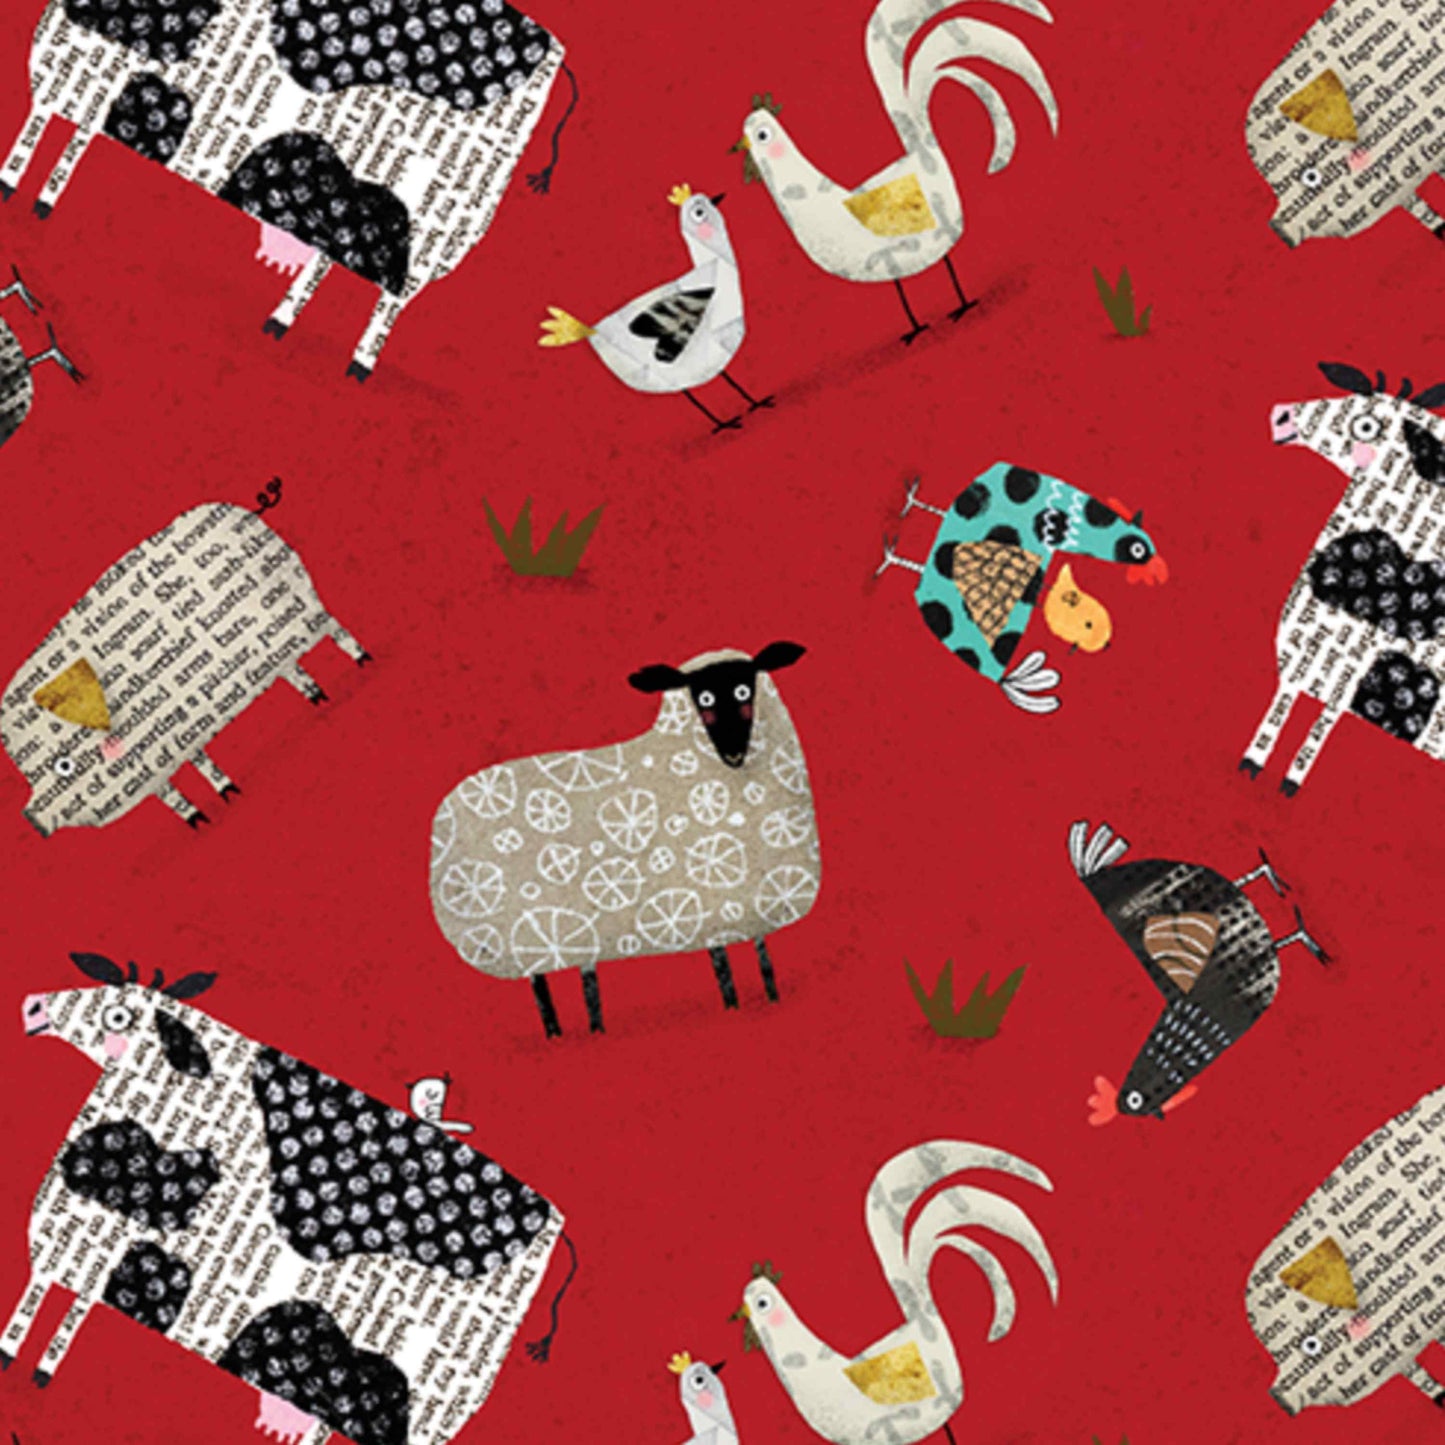 Fabric By The Yard - On The Farm - Red  - 09450-10 - Benartex - Contempo Studios